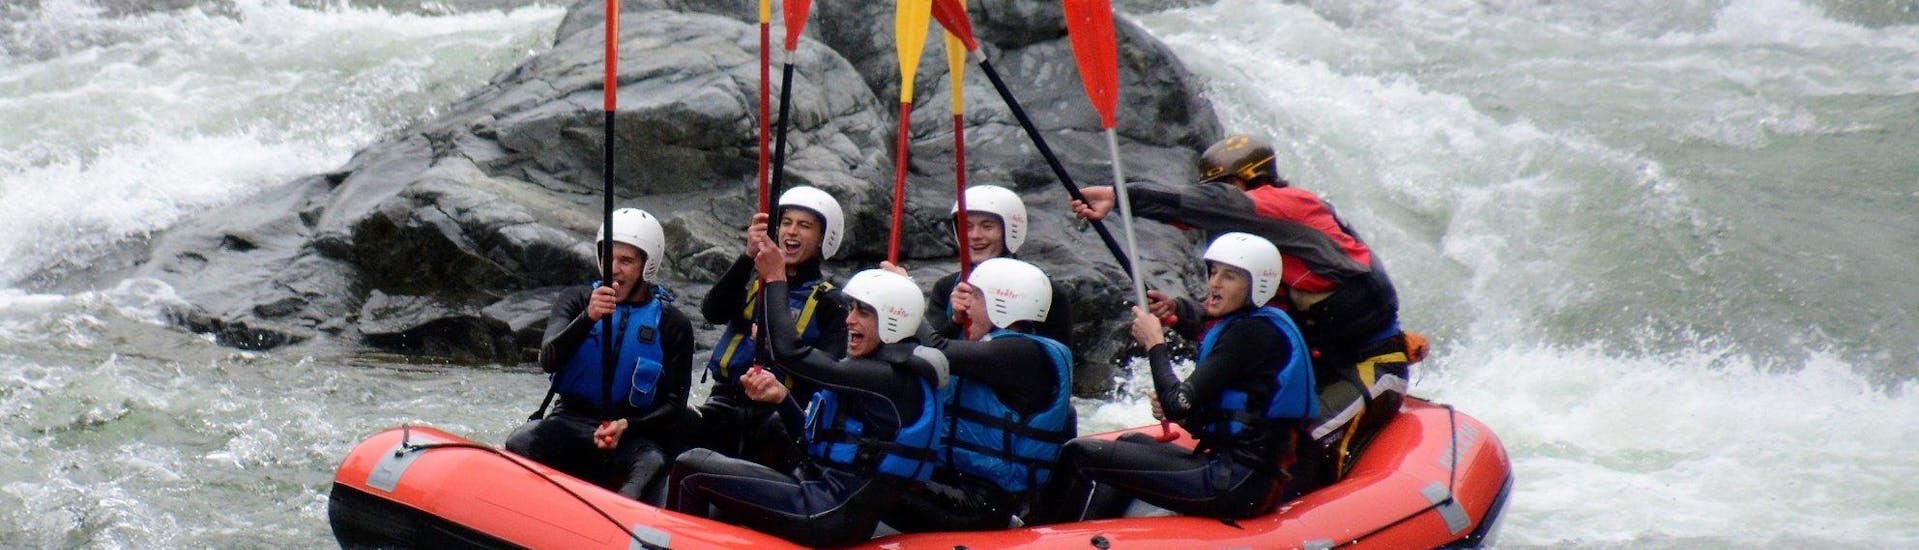 View of a group of people  having fun on a rafting boat in the lively white waters of the Sesia river during the Rafting on the Sesia with Centro Canoa e Rafting Monrosa.